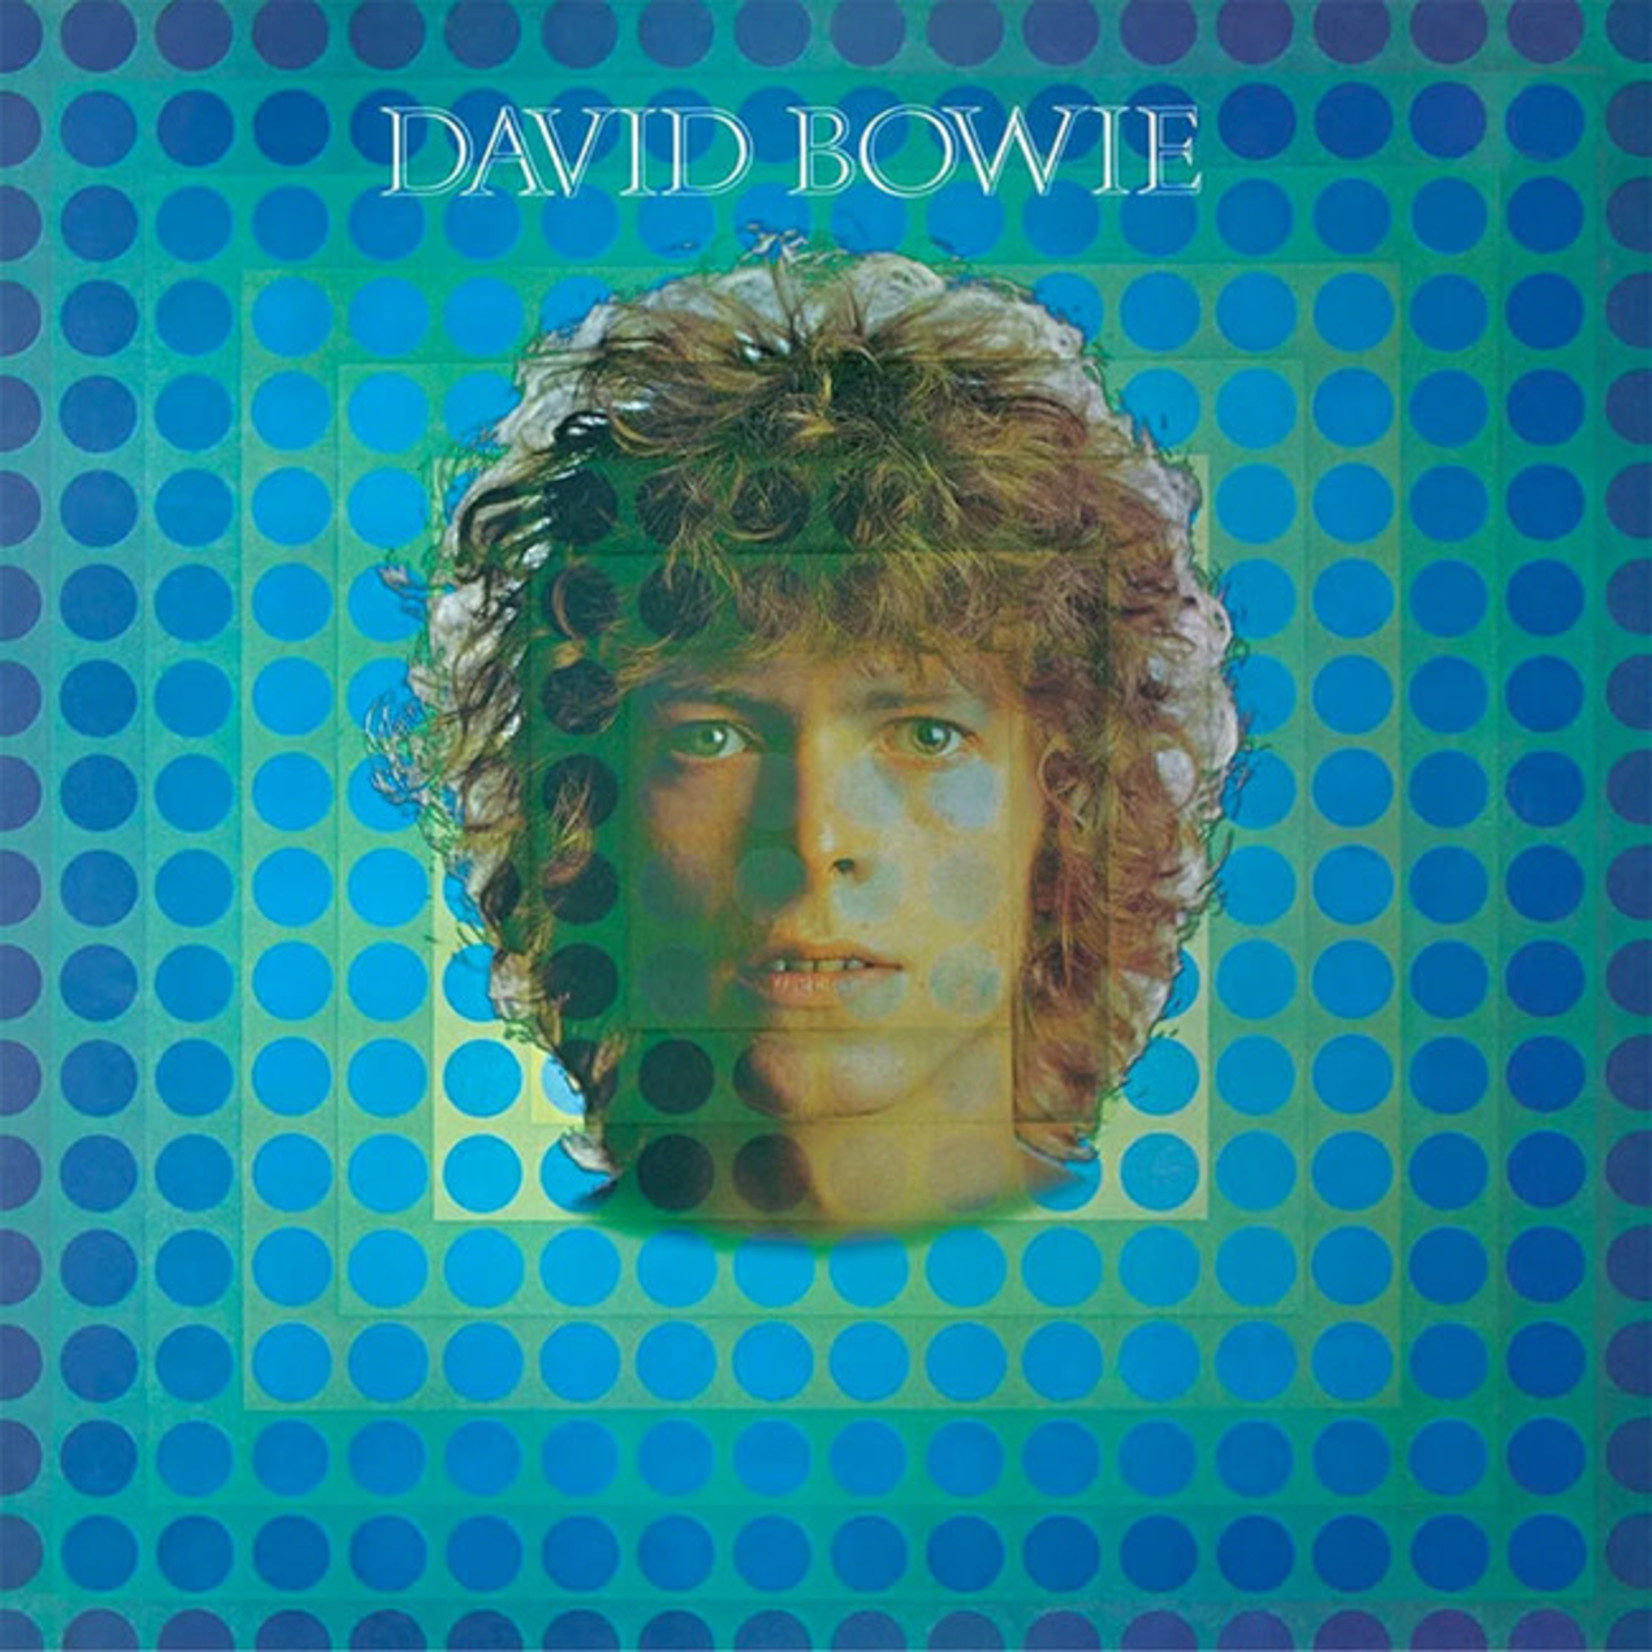 [New] David Bowie - self-titled (space oddity)